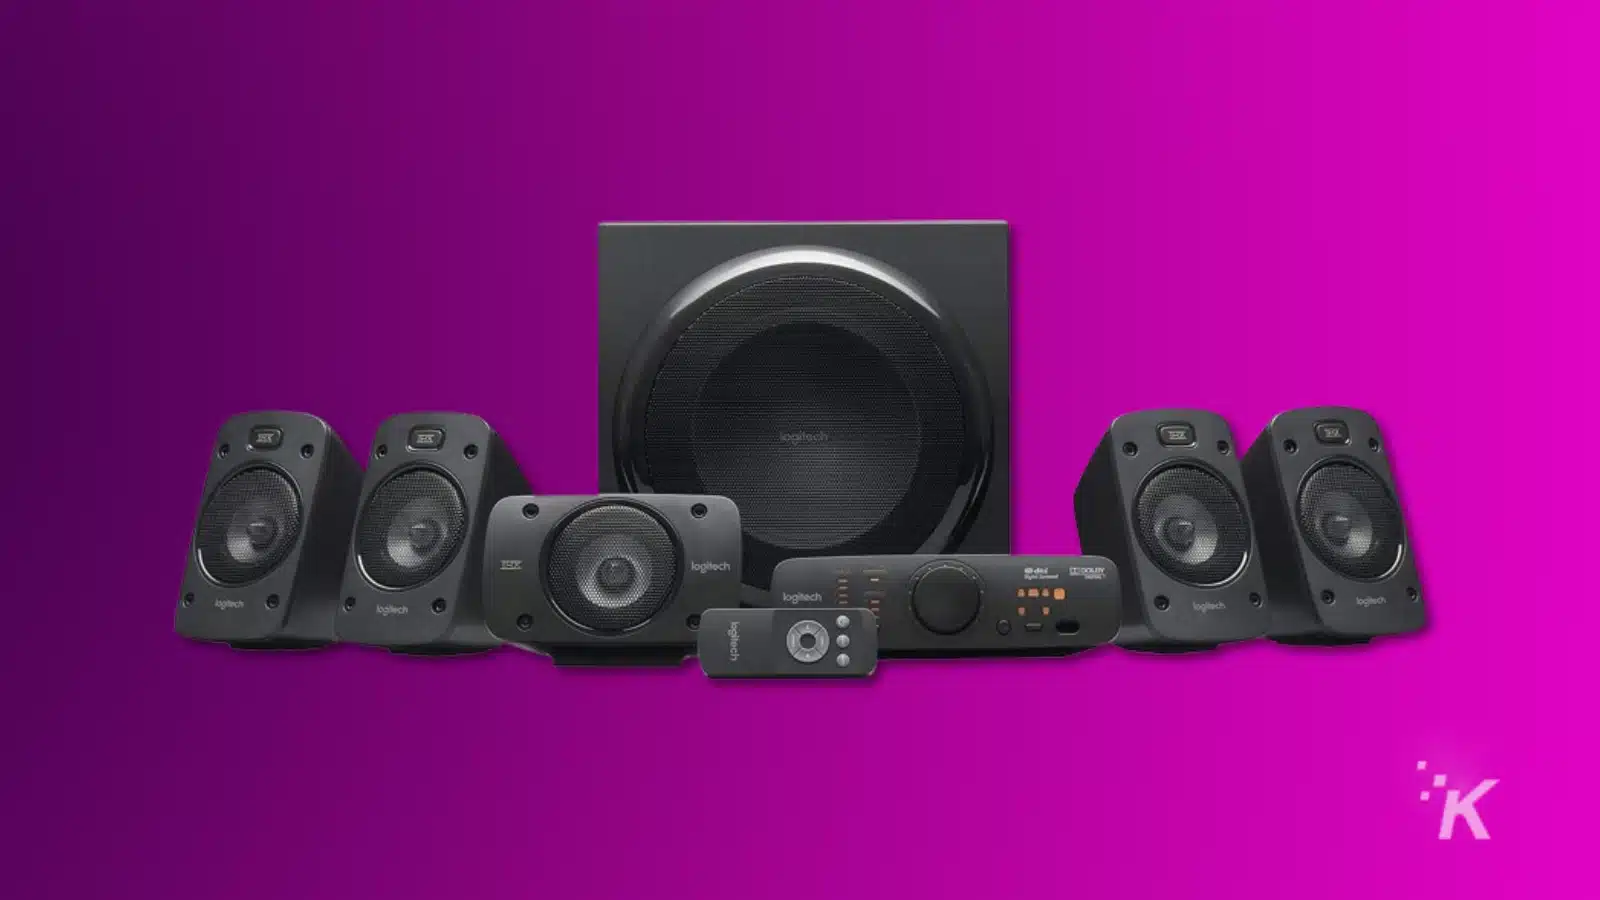 Render of the logitech g906 surround sound system on a purple background